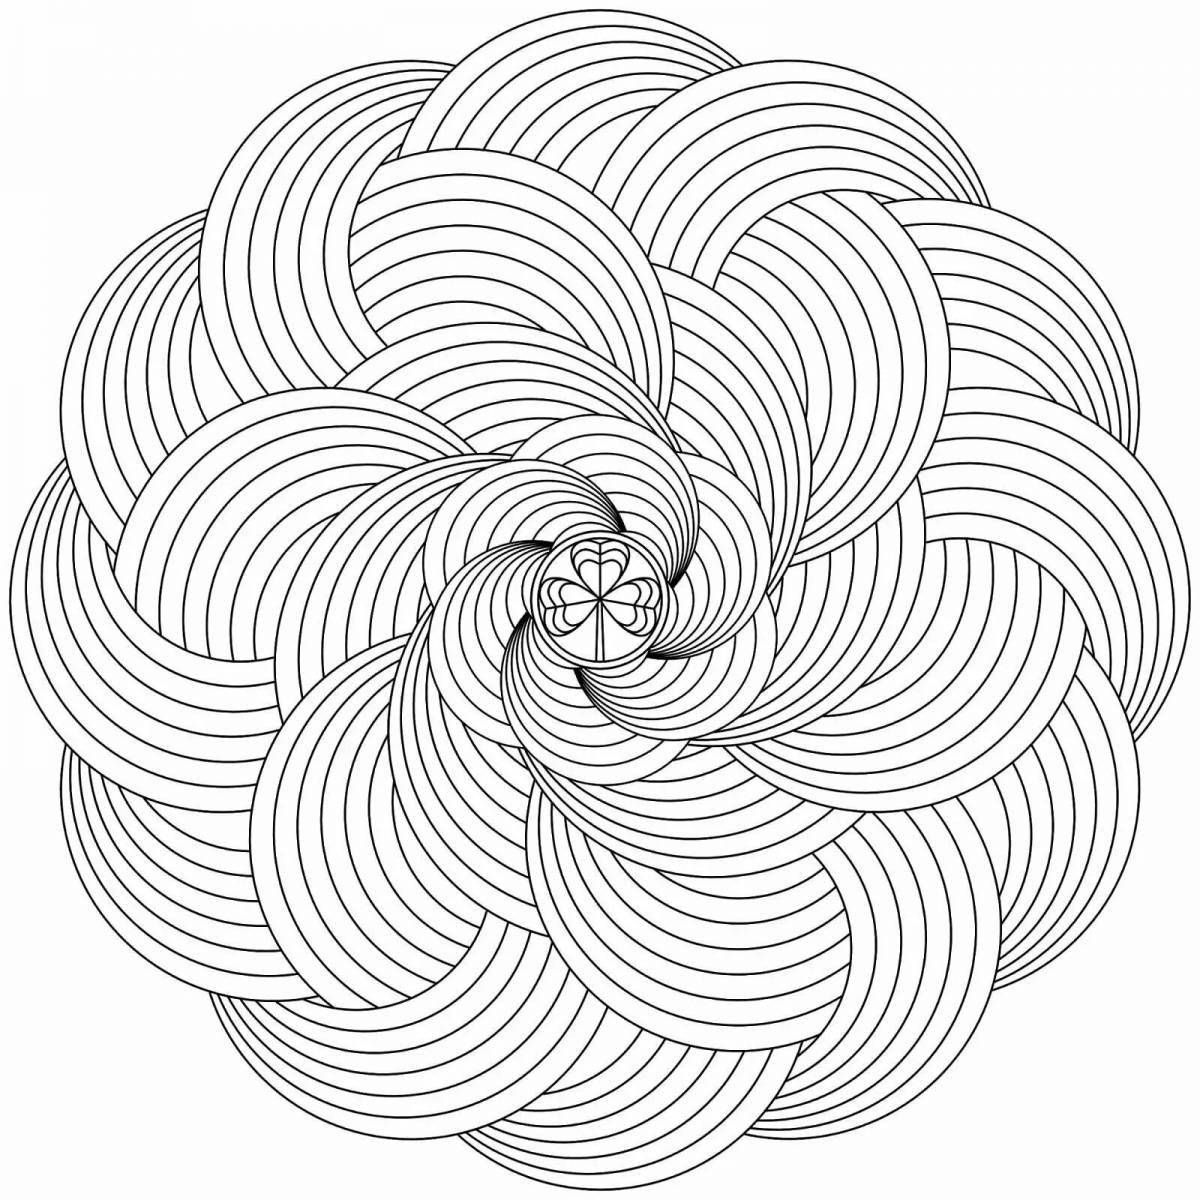 Creative spiral coloring book for kids